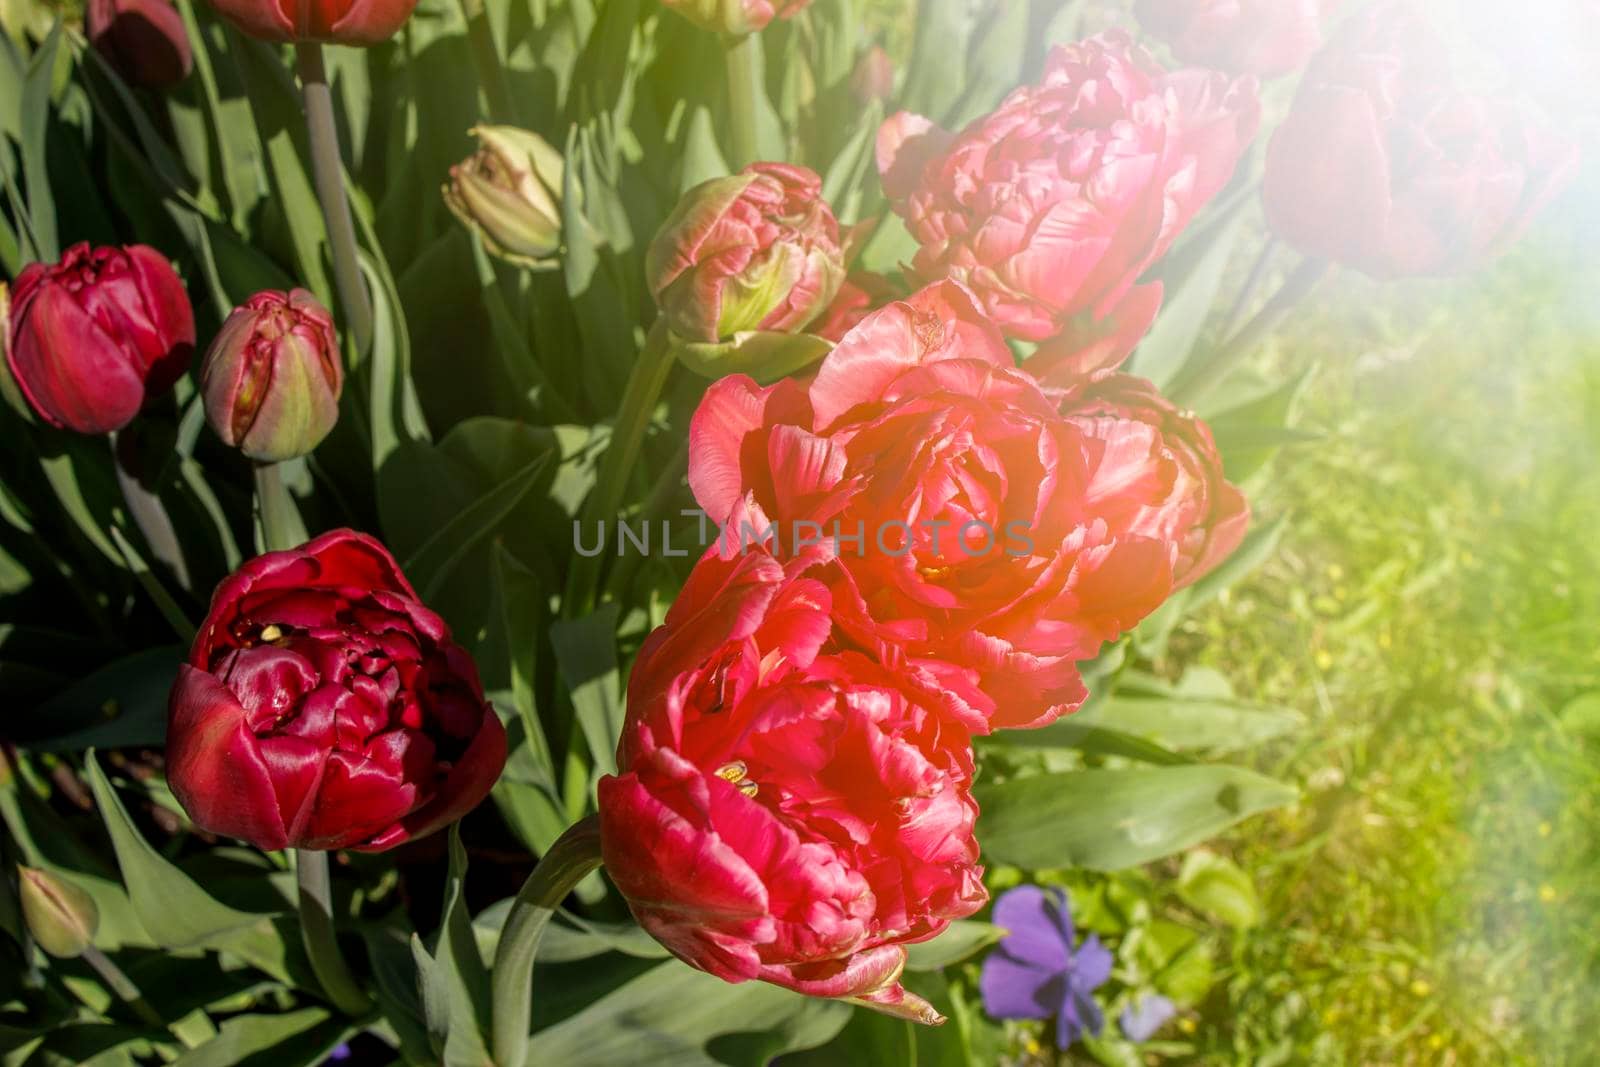 Red tulips are in the sun ligh in the spring garden near lake or pond. with falling petals